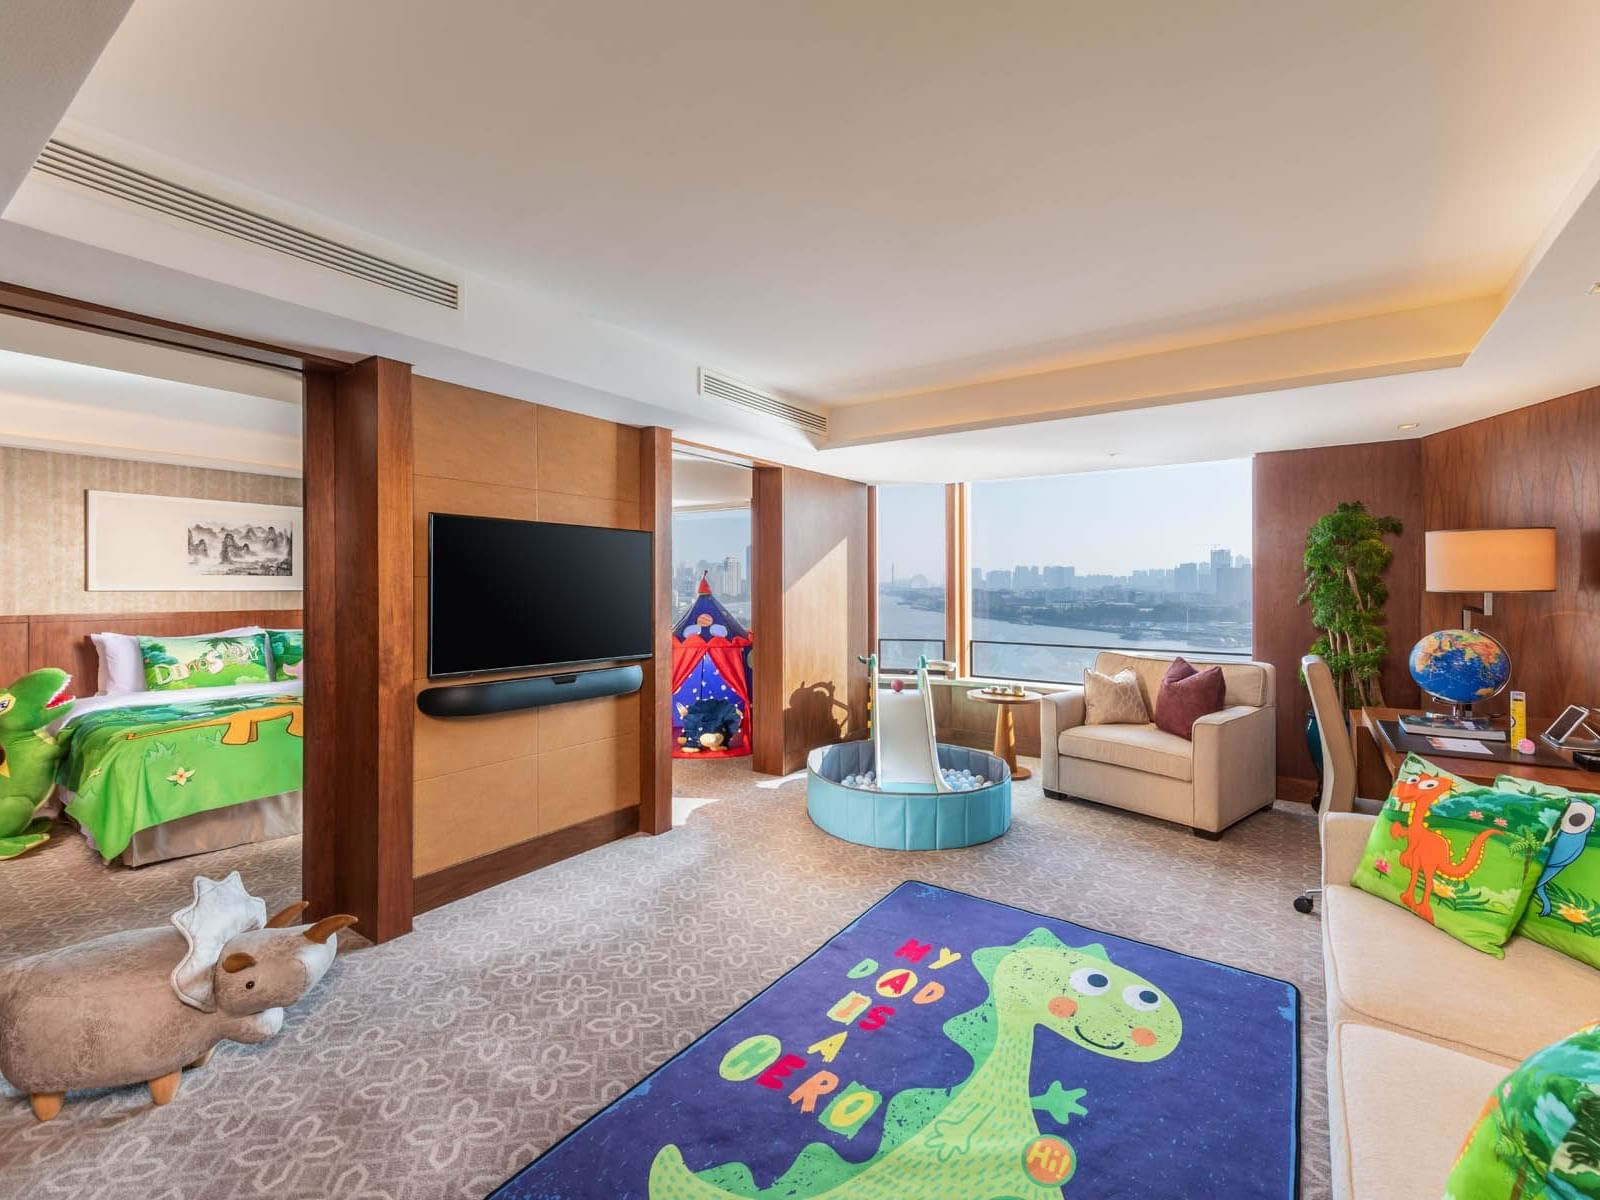 Kids-themed living room in the Family Suite at White Swan Hotel